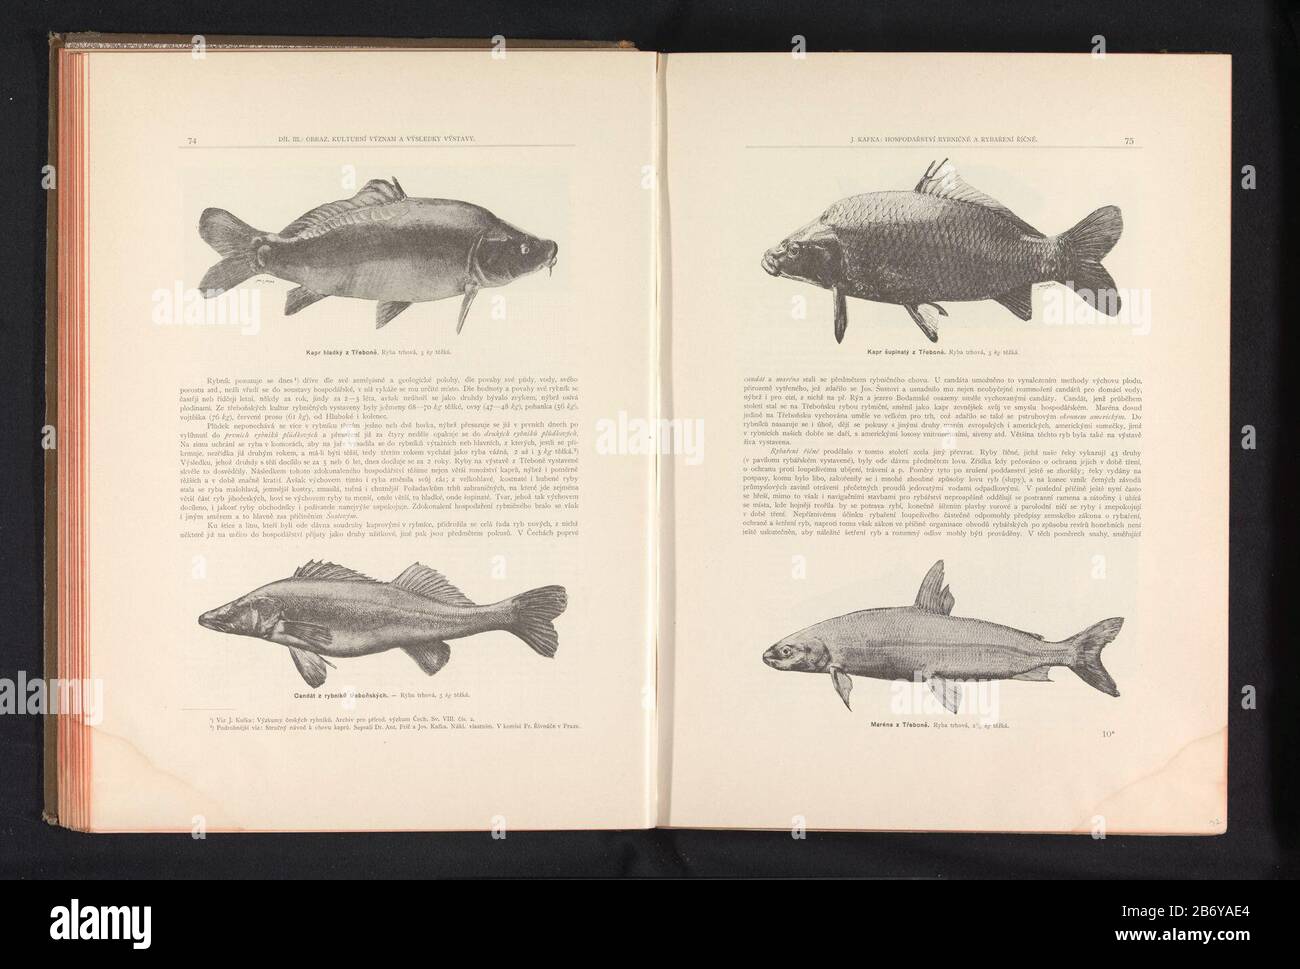 Carp, and a snoekbaarsKapr Hladky z Trebone (title object) Candat z rybniku trebonských (title object) Object Type: photomechanical printing page Object number: RP-F-2001-7-749B-31 Manufacturer : photographer: anoniemclichémaker : Carl Bellmann Place manufacture: Prague Dating: ca. 1891 - in or in front 1895 Material: paper Technique: autotypie Dimensions: page: h 372 mm × W 270 mm Explanation Prints on page 74. Subject: bony fishes: carp fishes Stock Photo